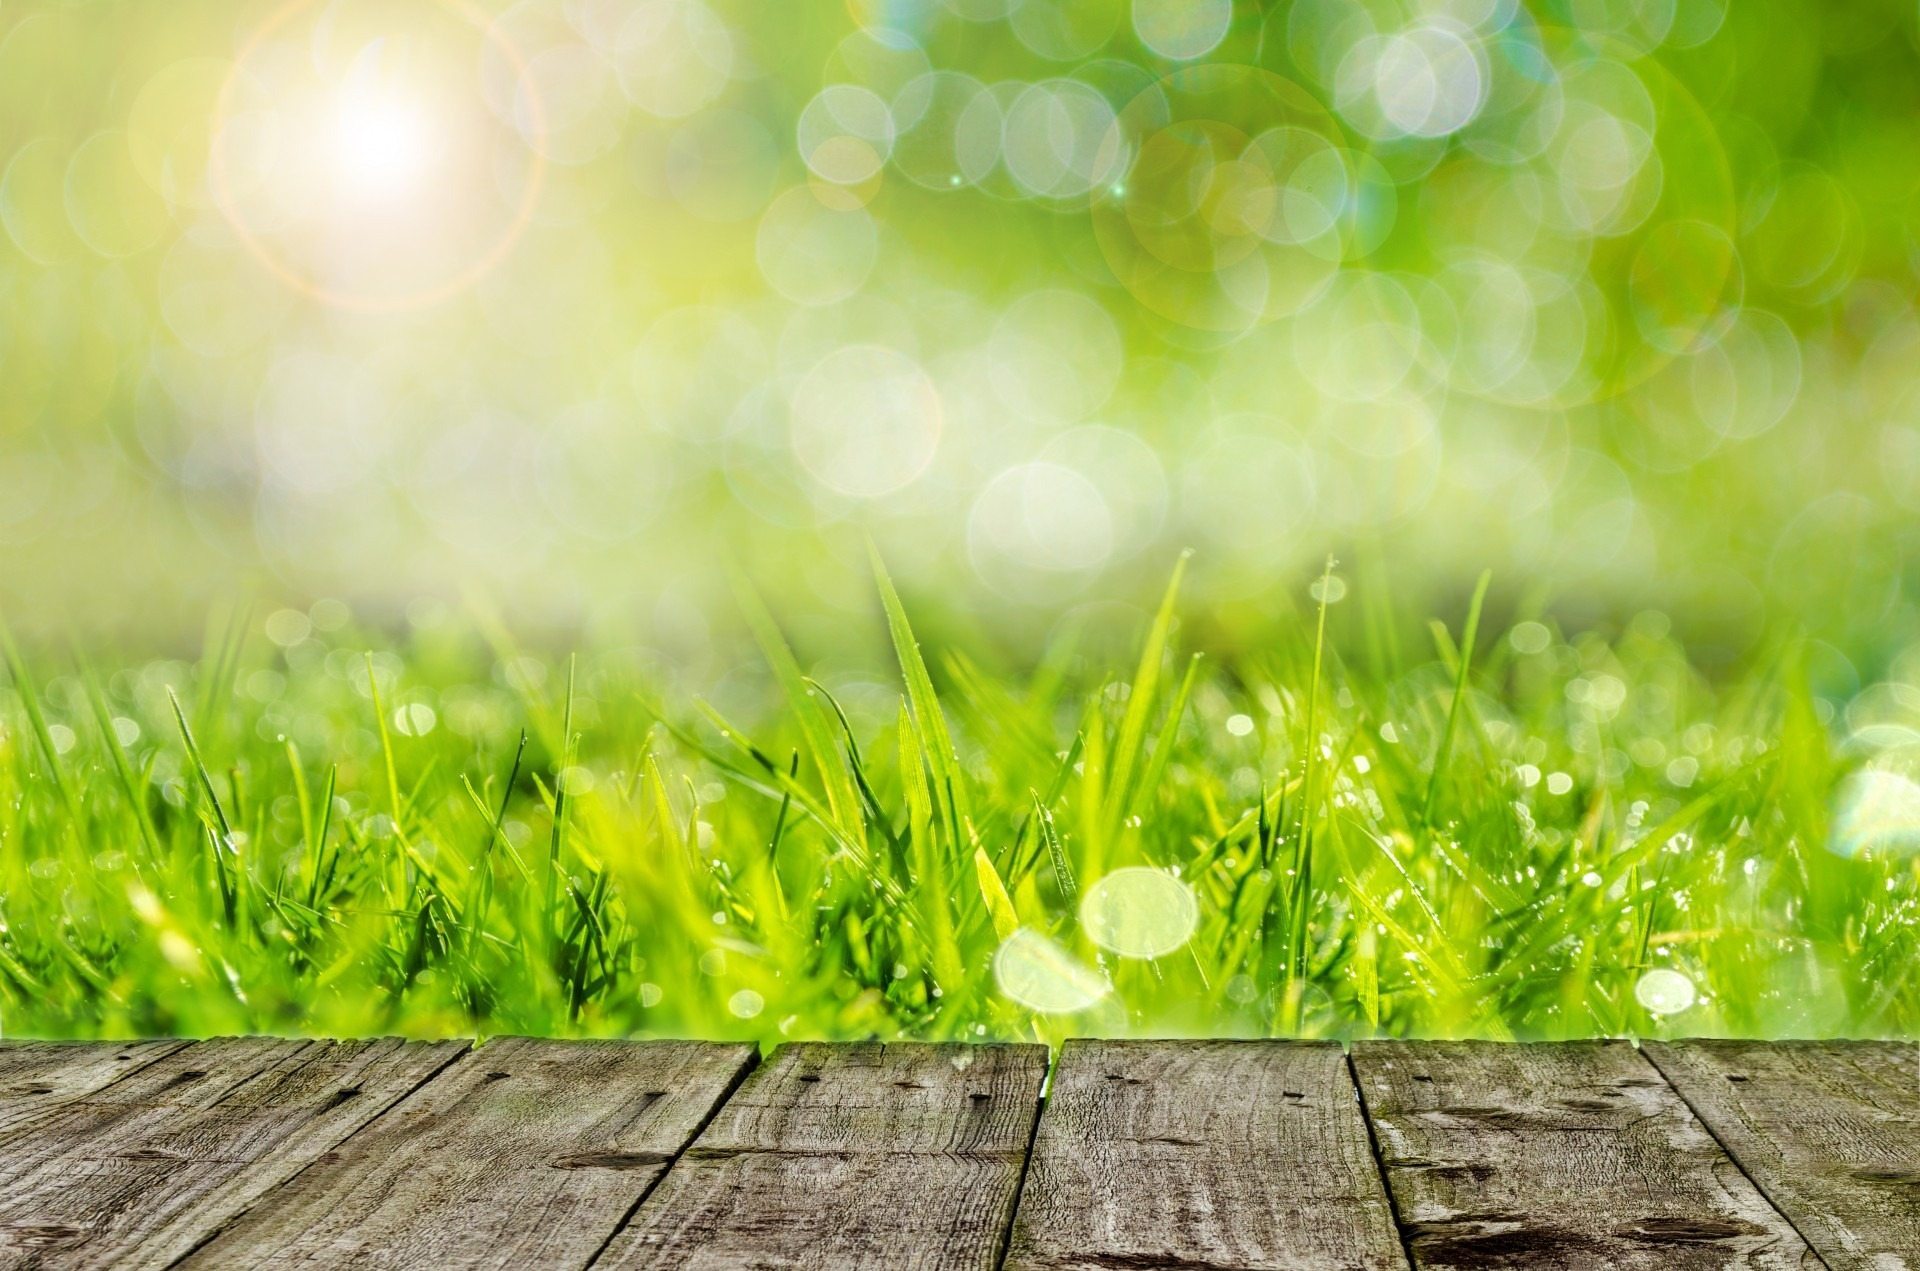 Grass Gratitude: Seven Reasons Why Our Grass Is Awesome